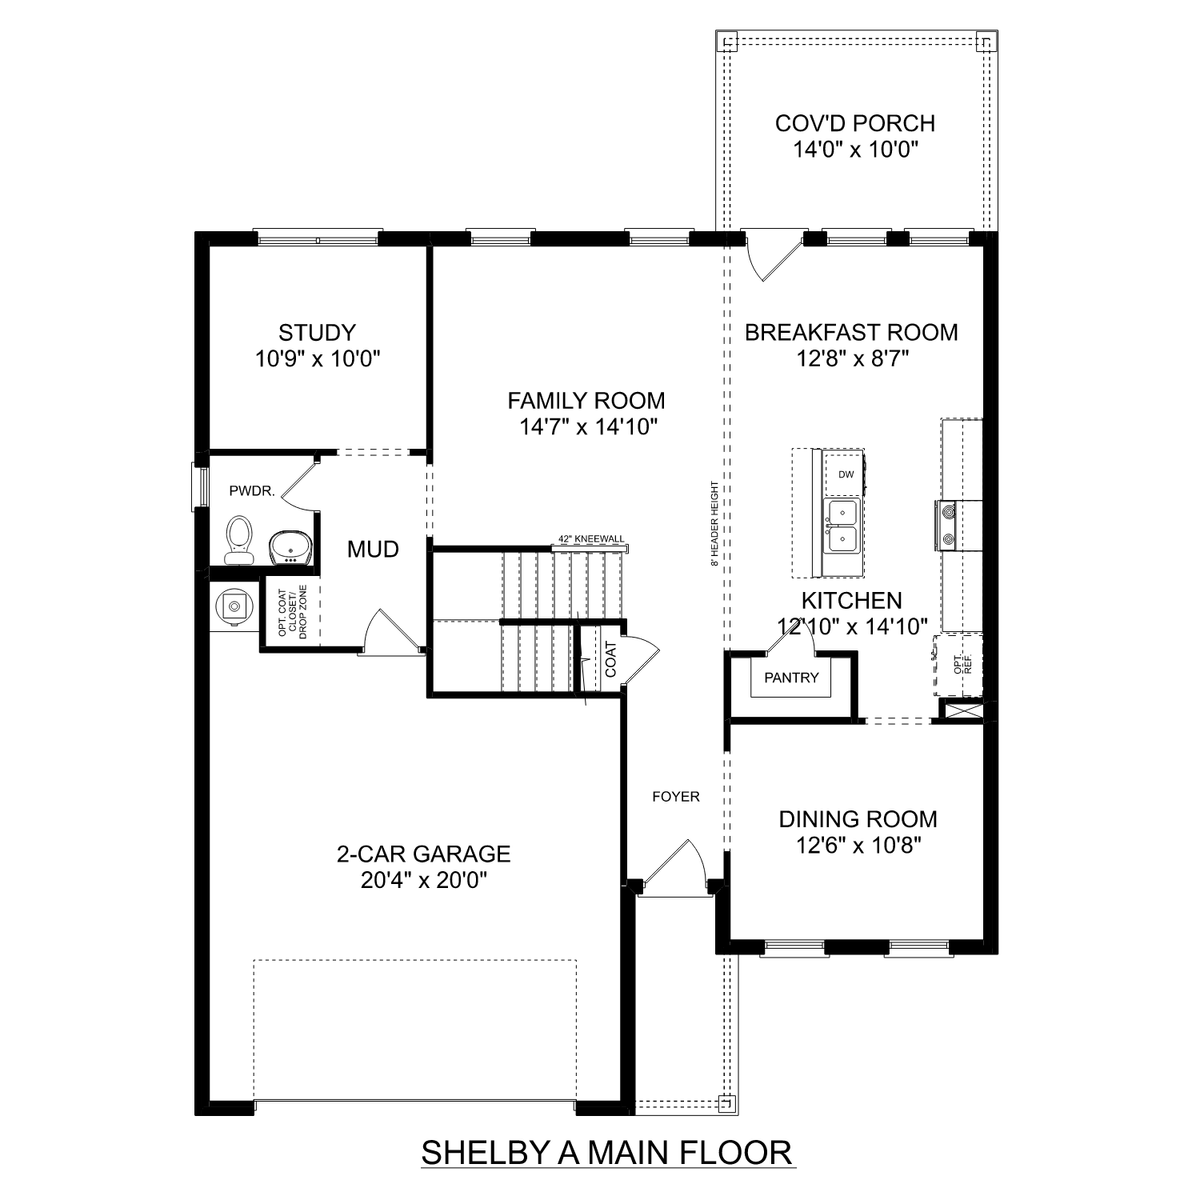 1 - The Shelby A buildable floor plan layout in Davidson Homes' Williams Pointe community.